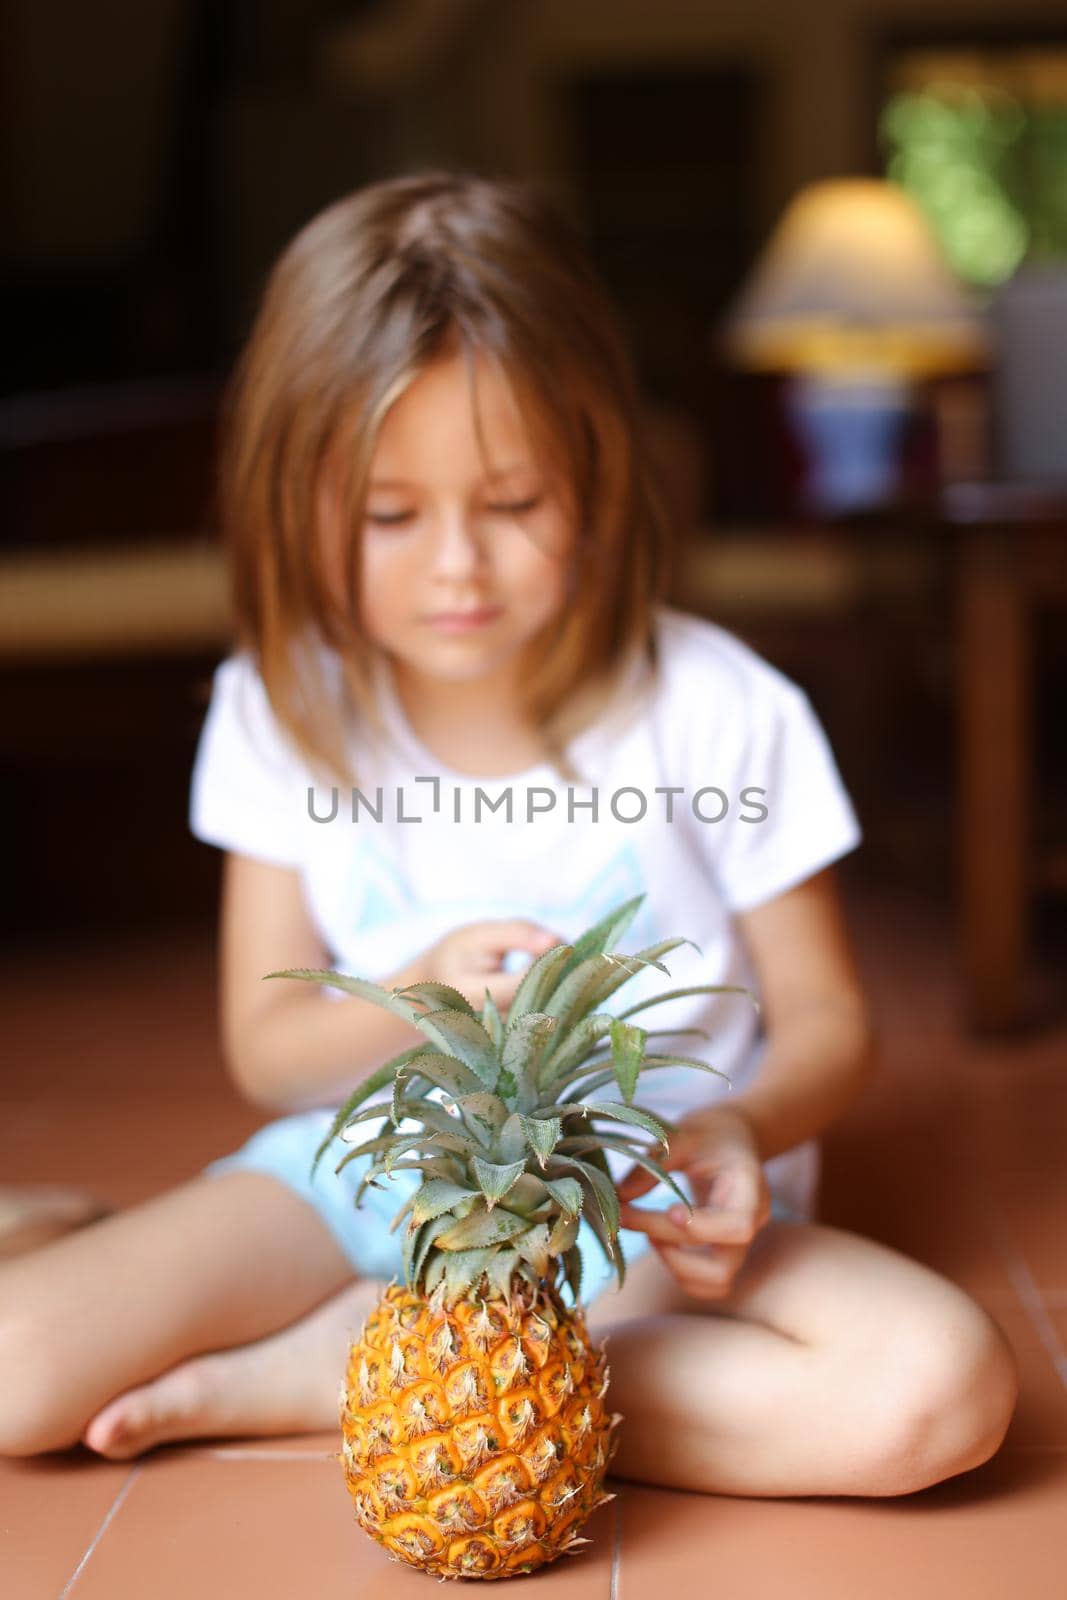 Closeup pineapple with little girl sitting barefoot on floor in background. Concept of health life, fruit and kids.